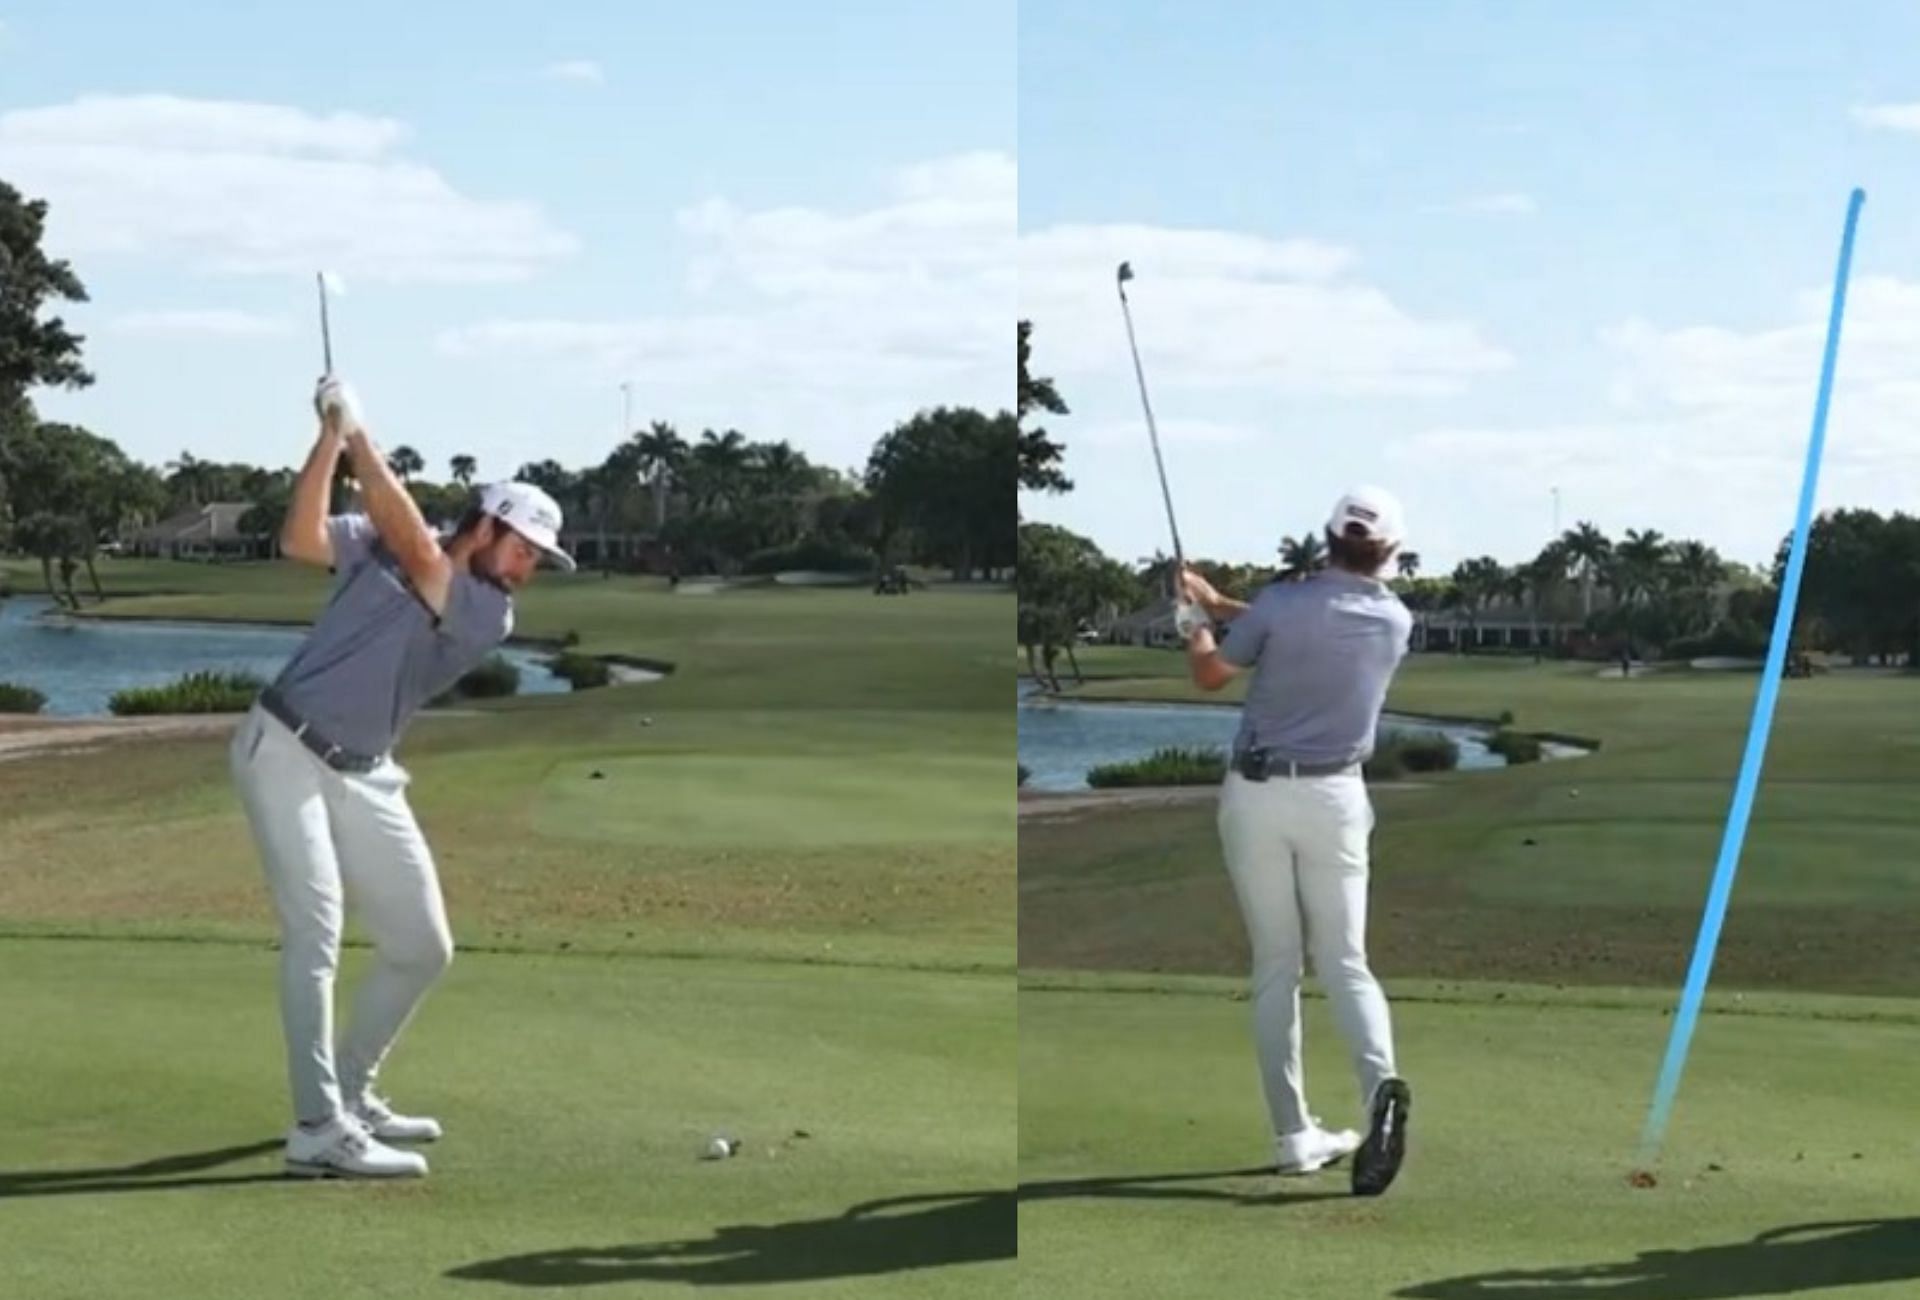 Cameron Young hitting a shot with his 2-iron (Image via X@GolfDigest).